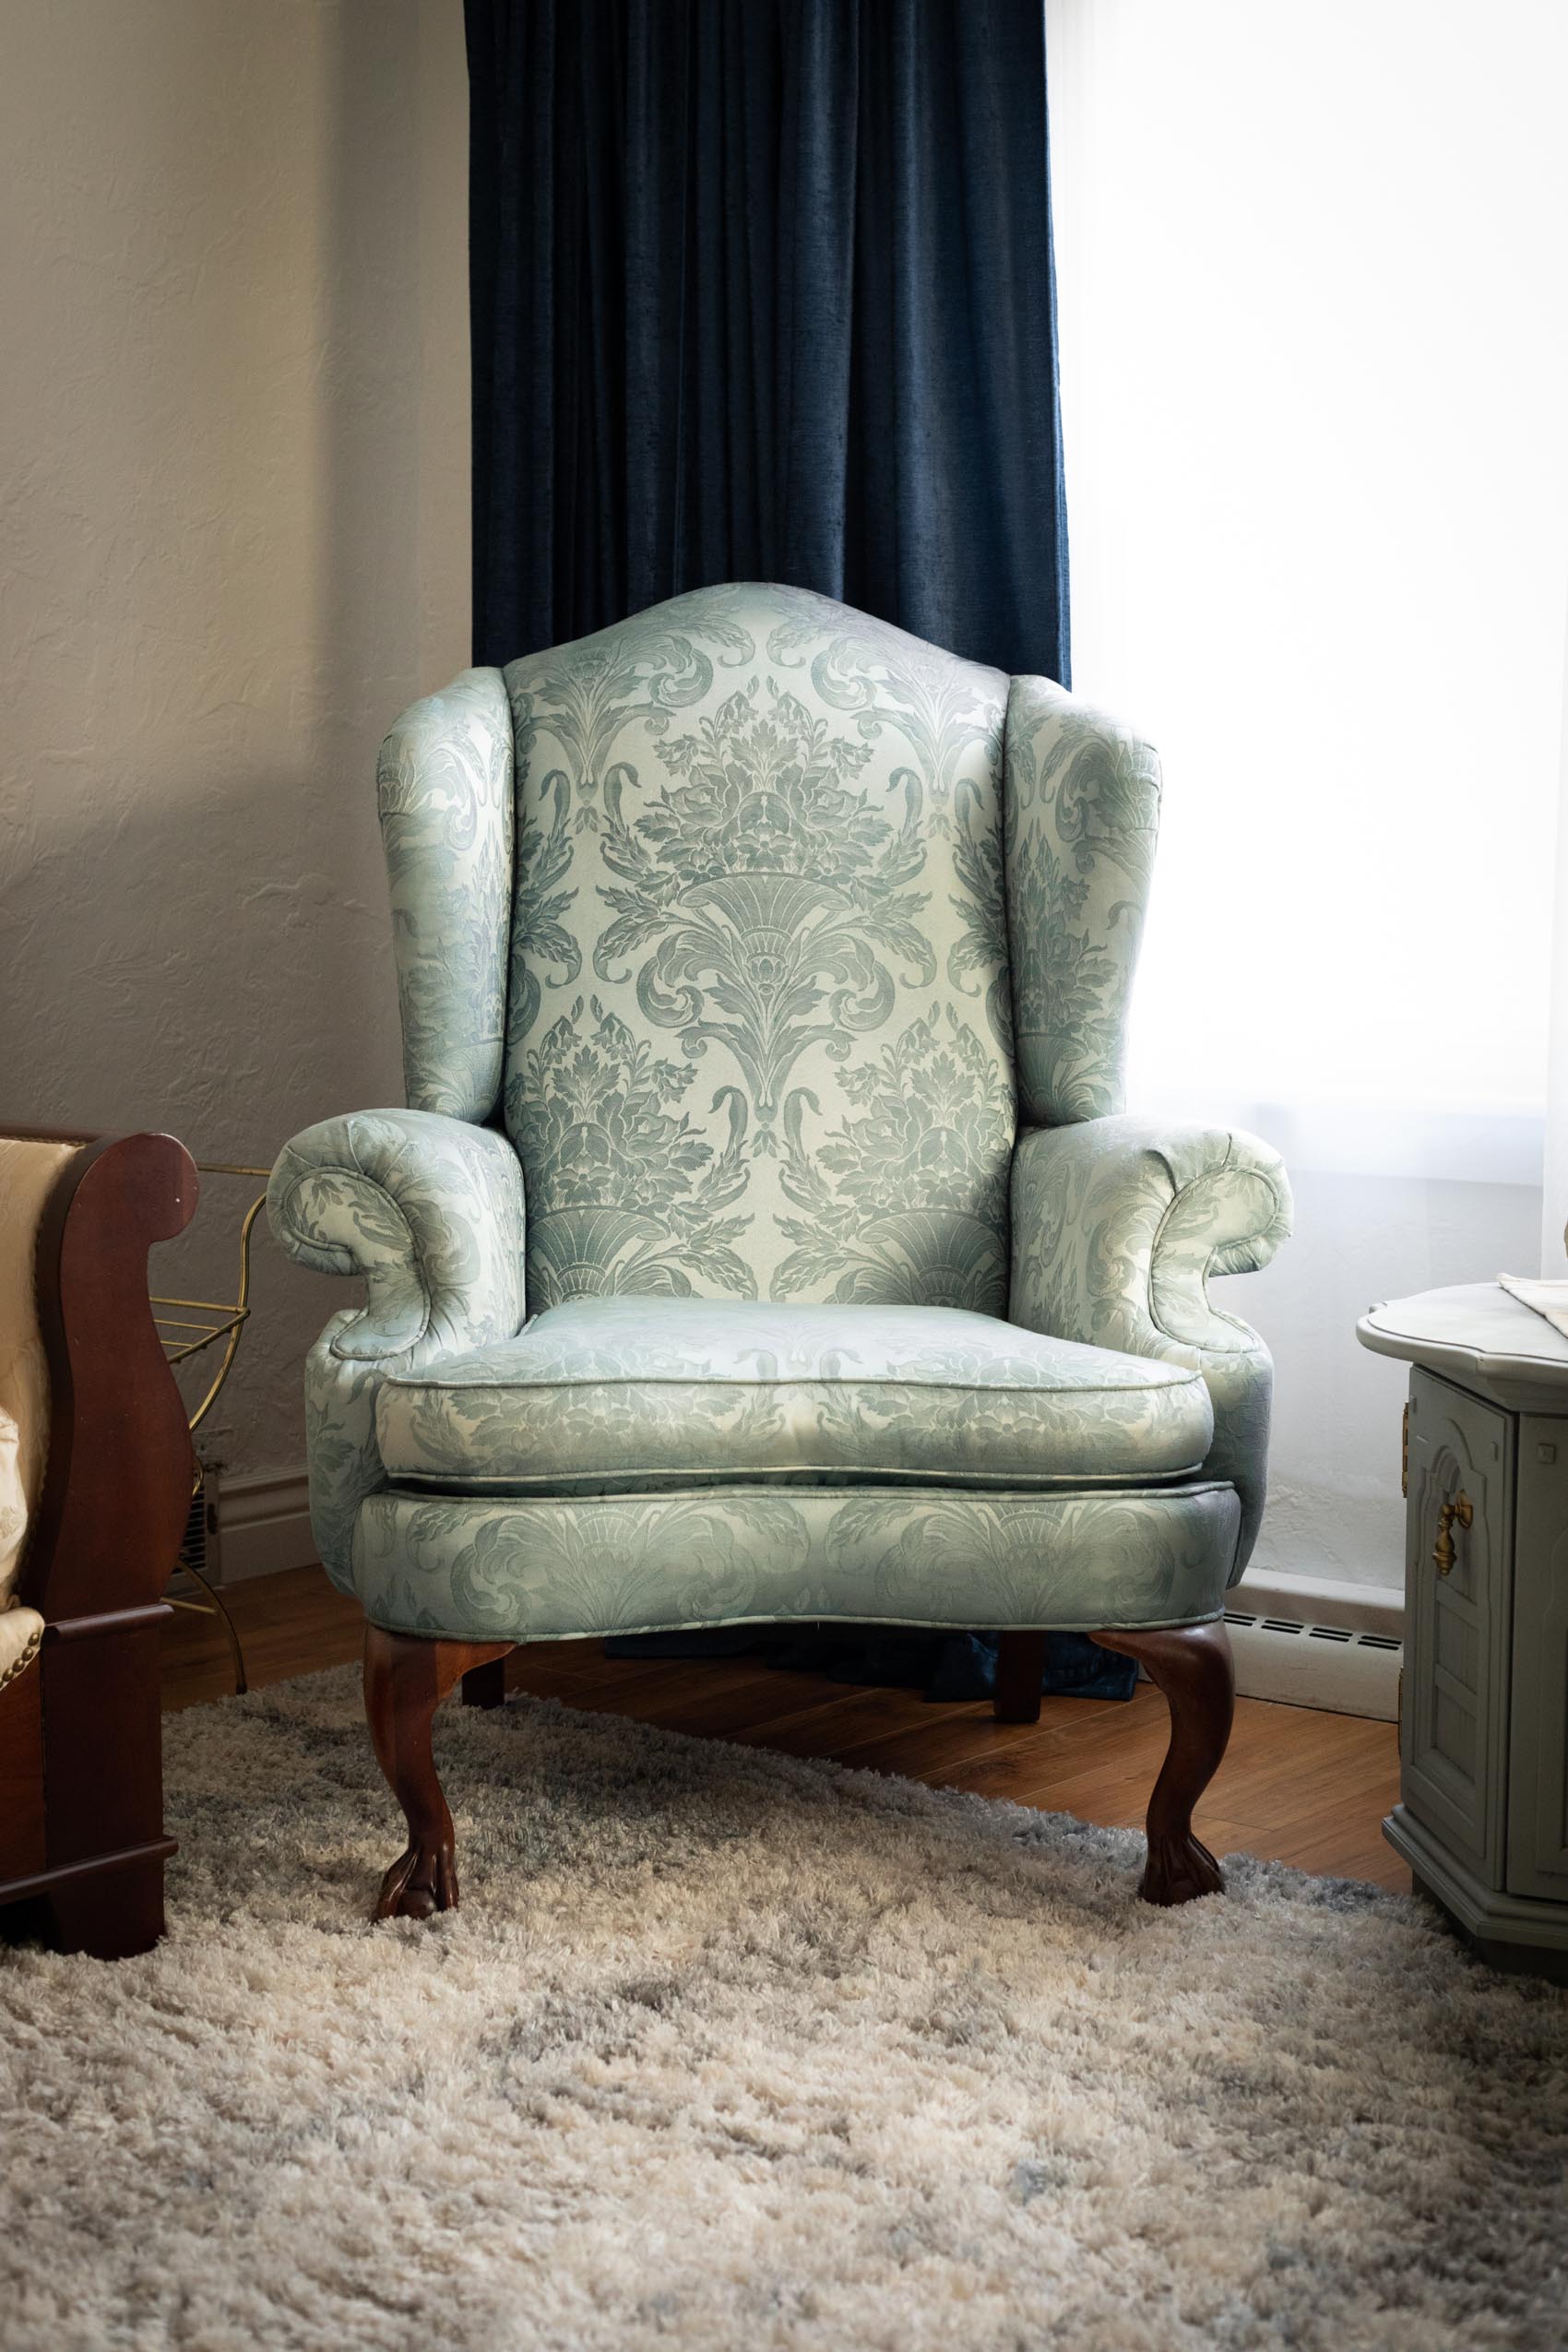 Rit Dye Before and After: After shot of the upholstered chair I recently dyed